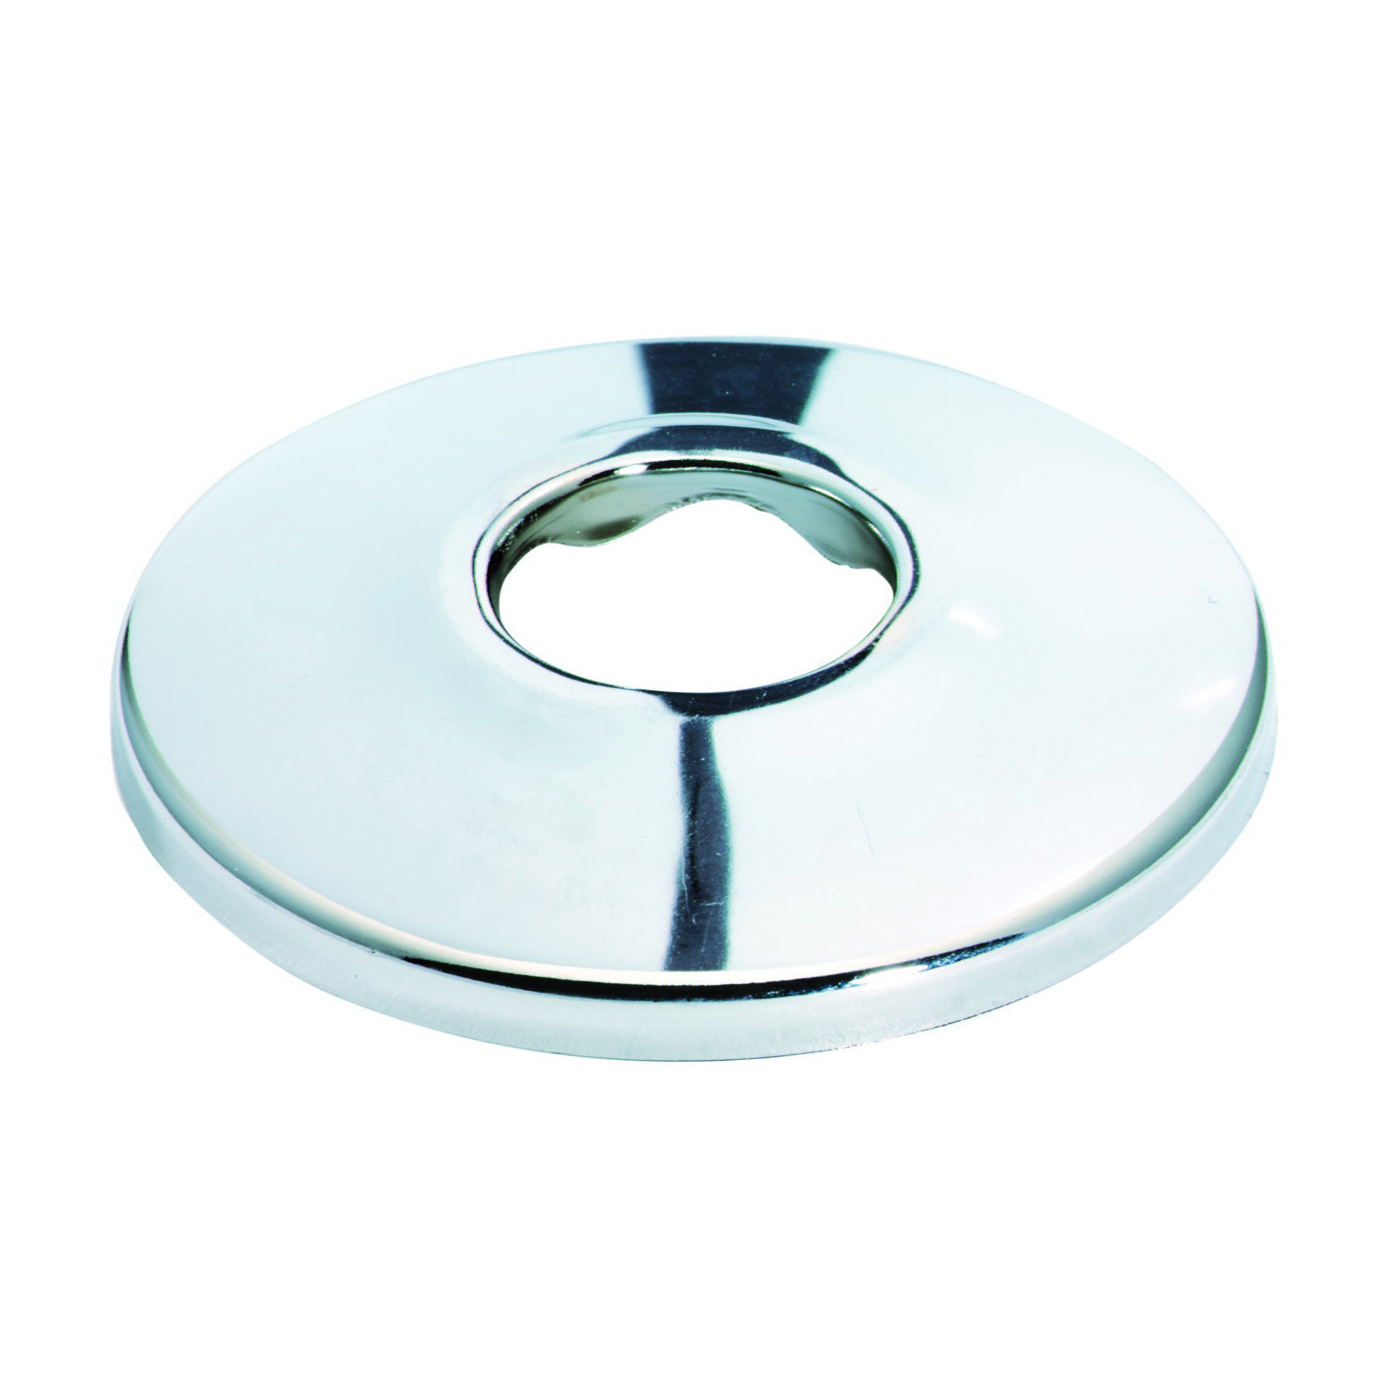 PP91PC Bath Flange, 2-1/2 in OD, For: 1/2 in IPS Pipes, Brass, Chrome